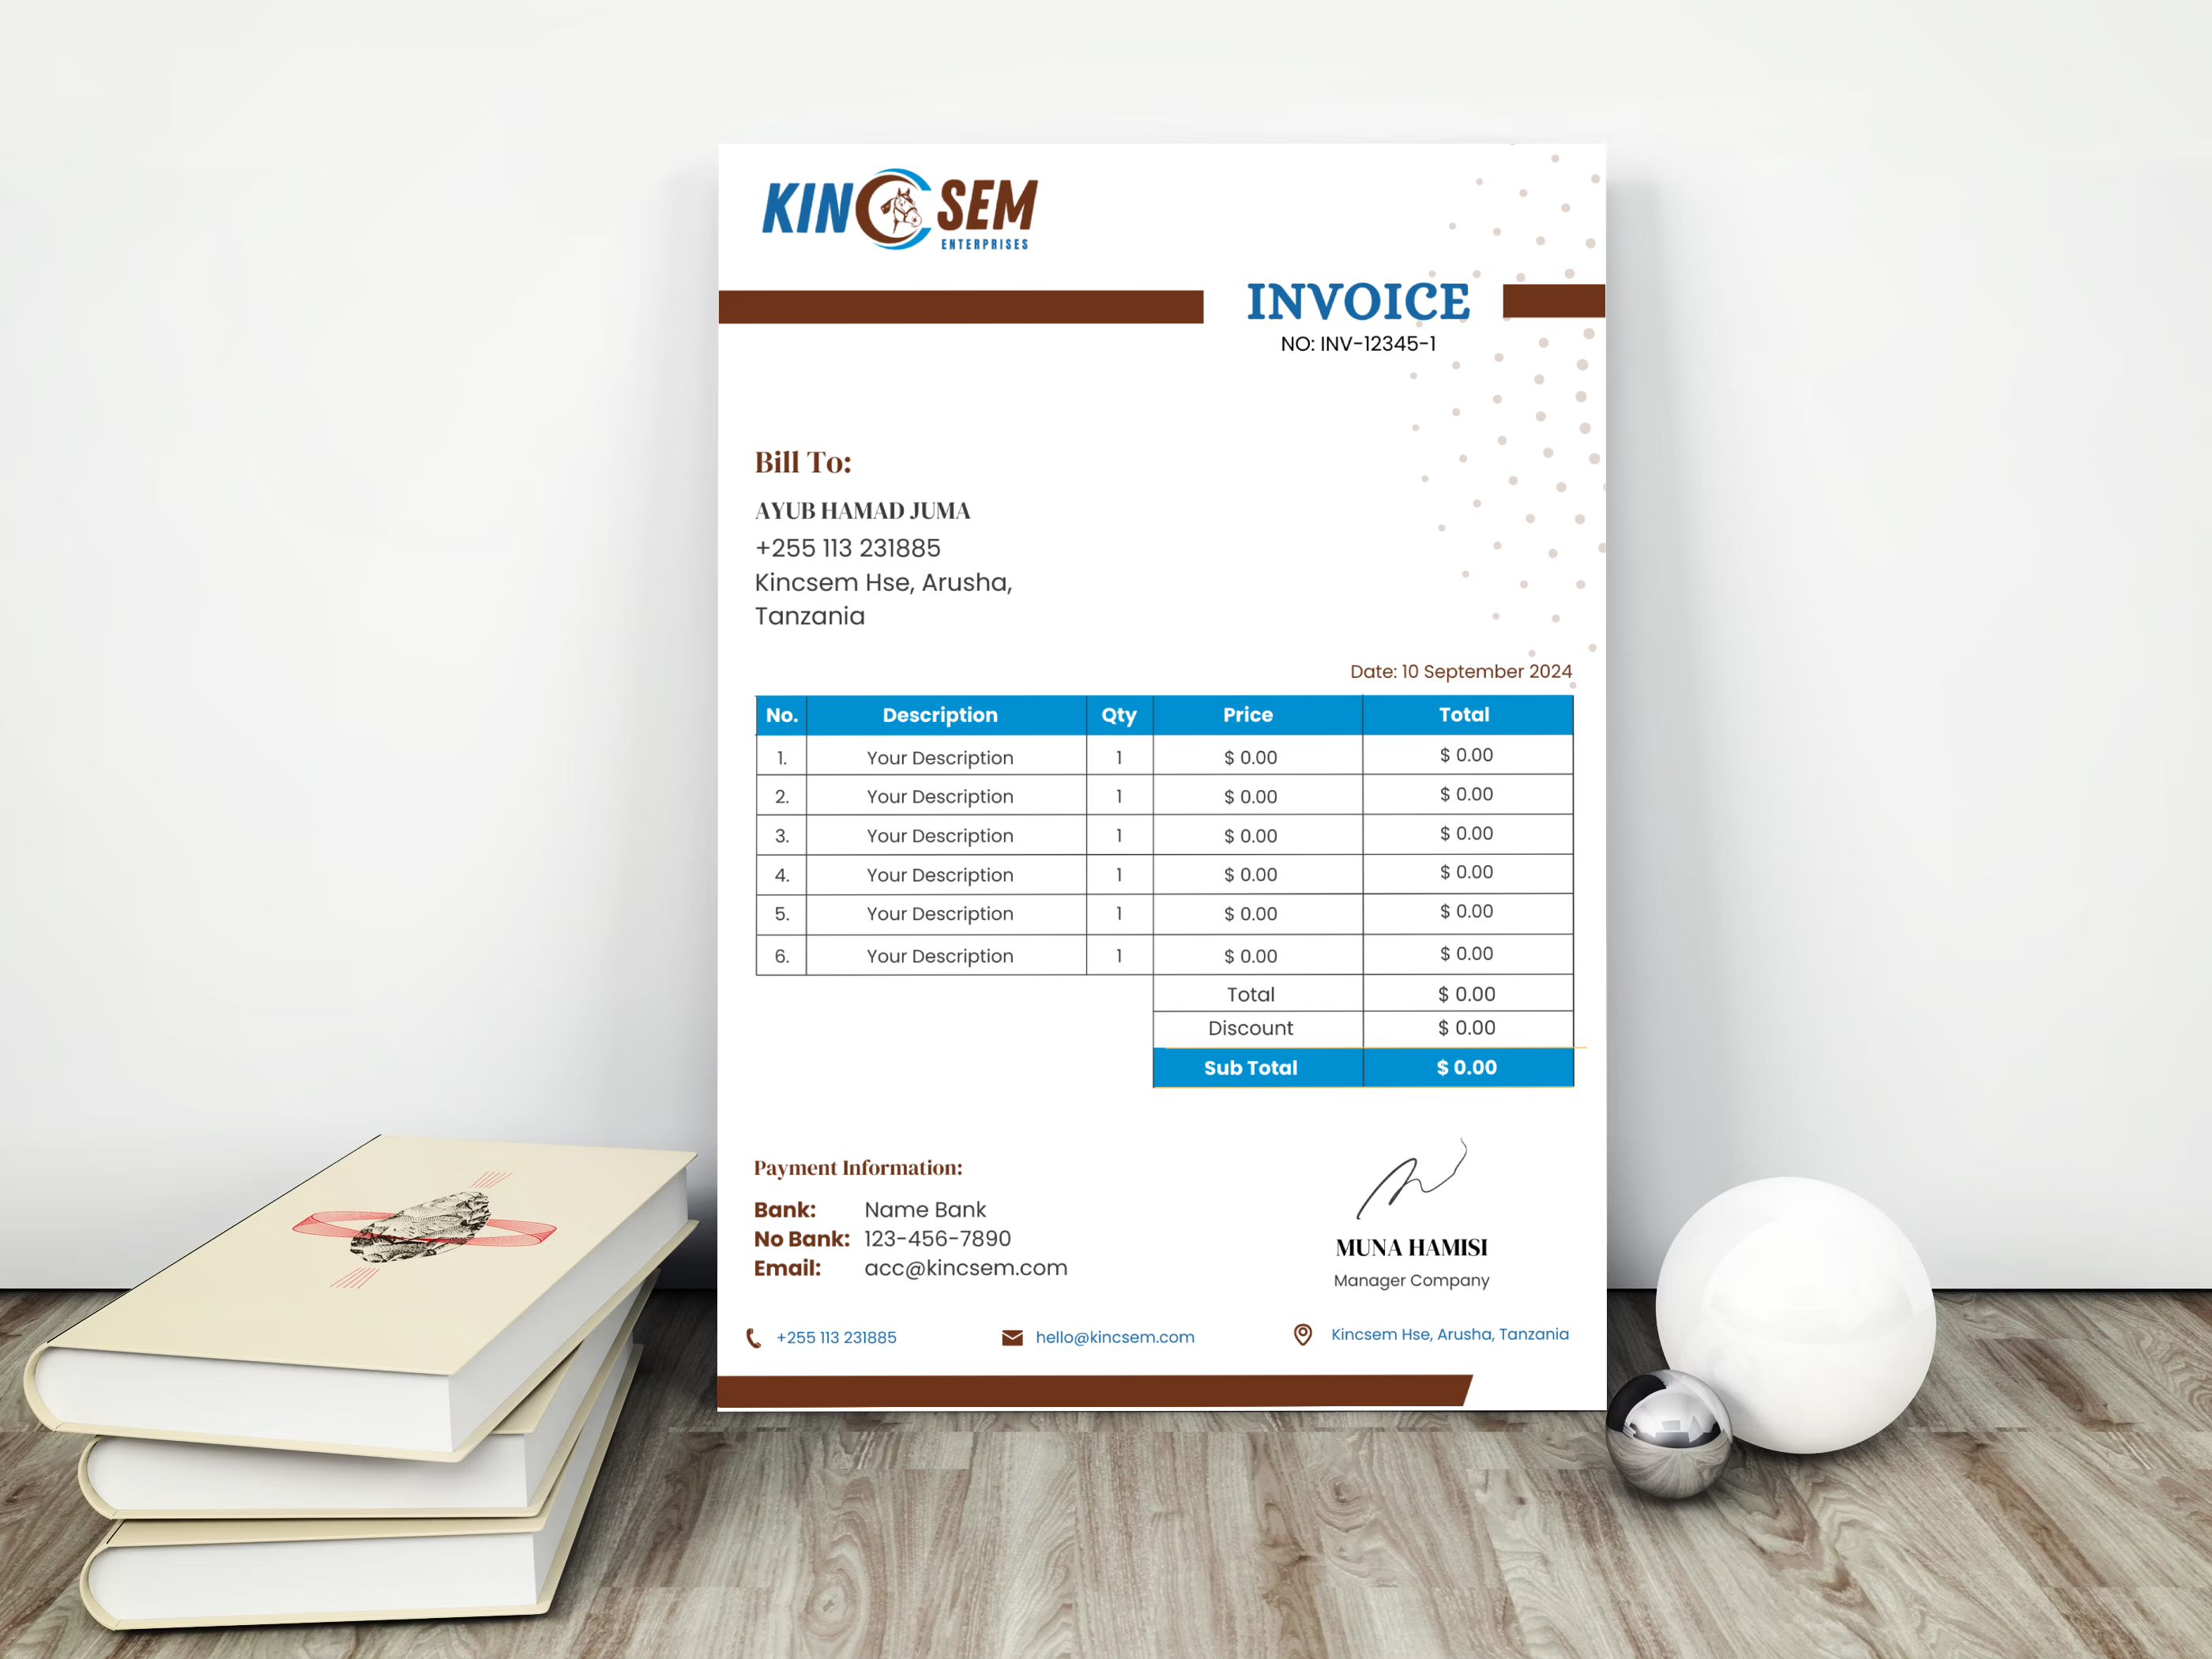 invoice-design-template-with-clean-layout-and-easy-to-read-information